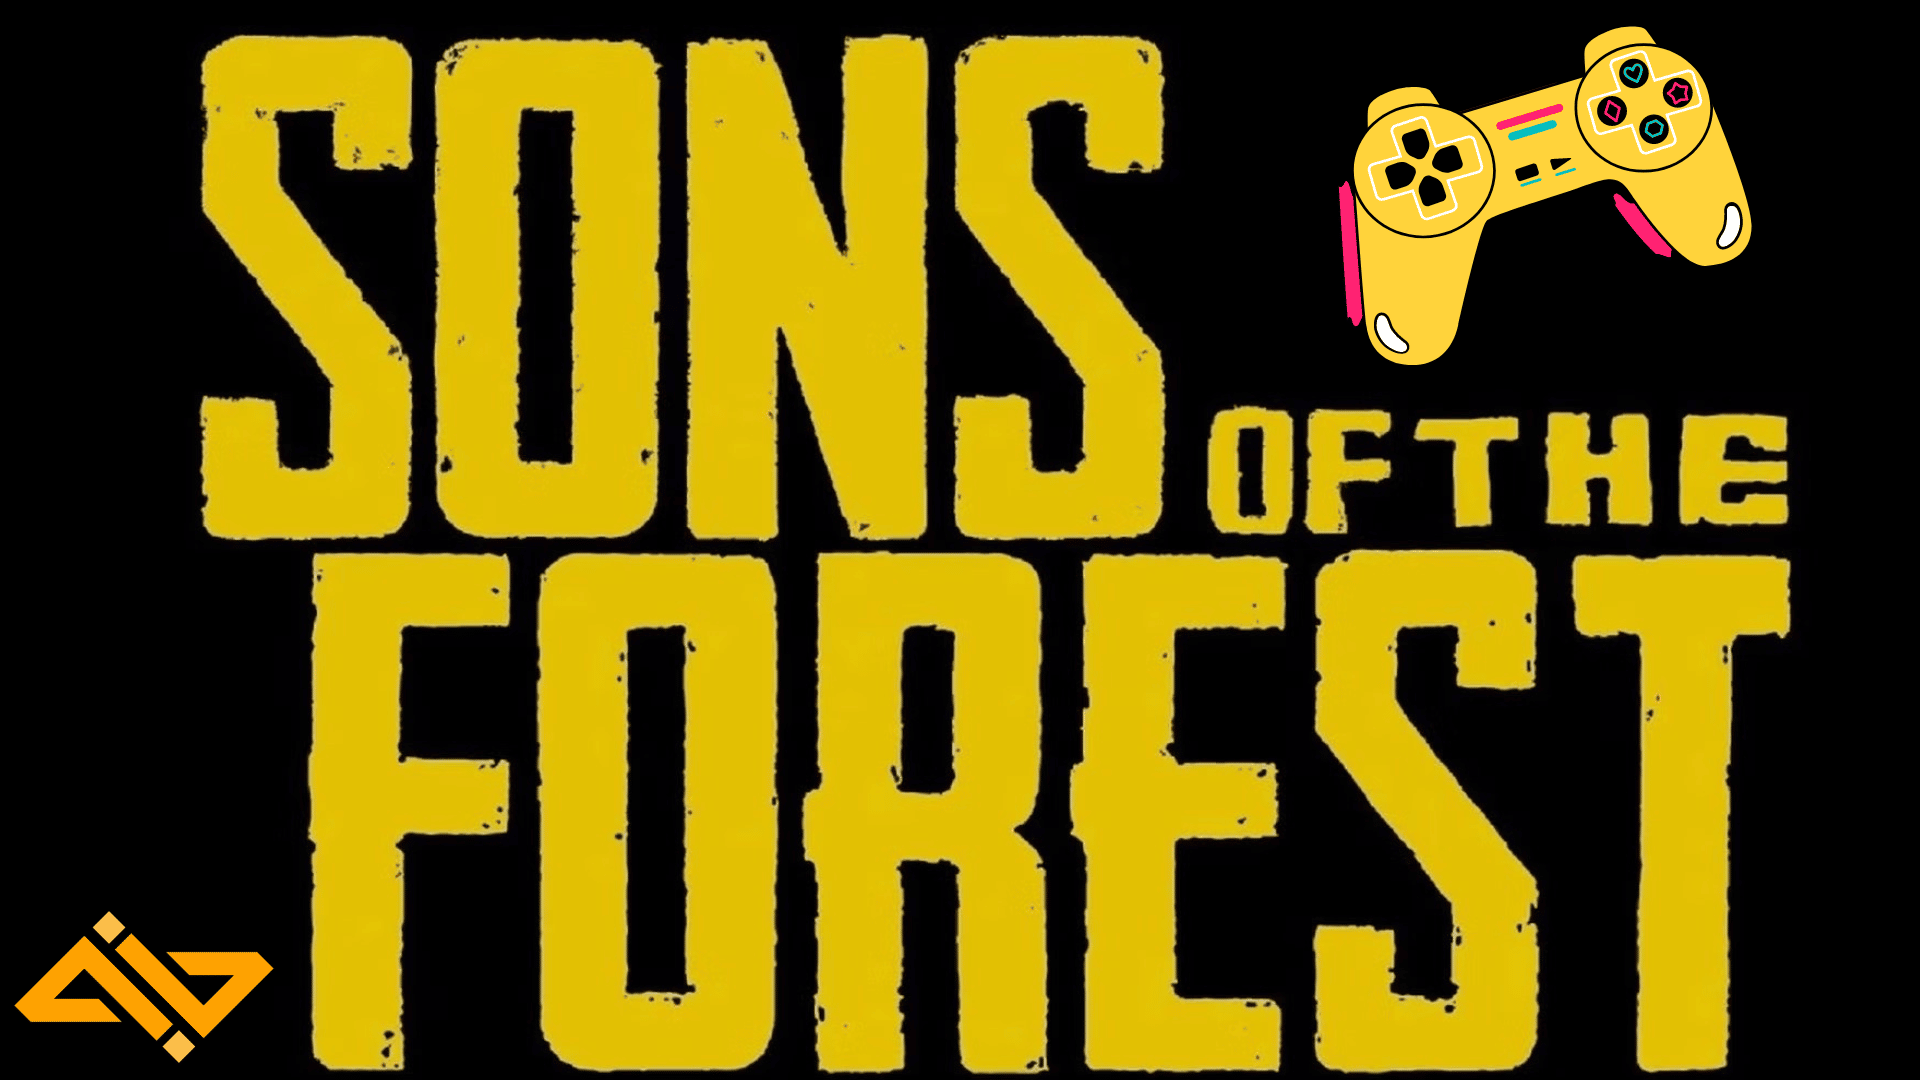 Is Sons Of The Forest Coming To PS4?